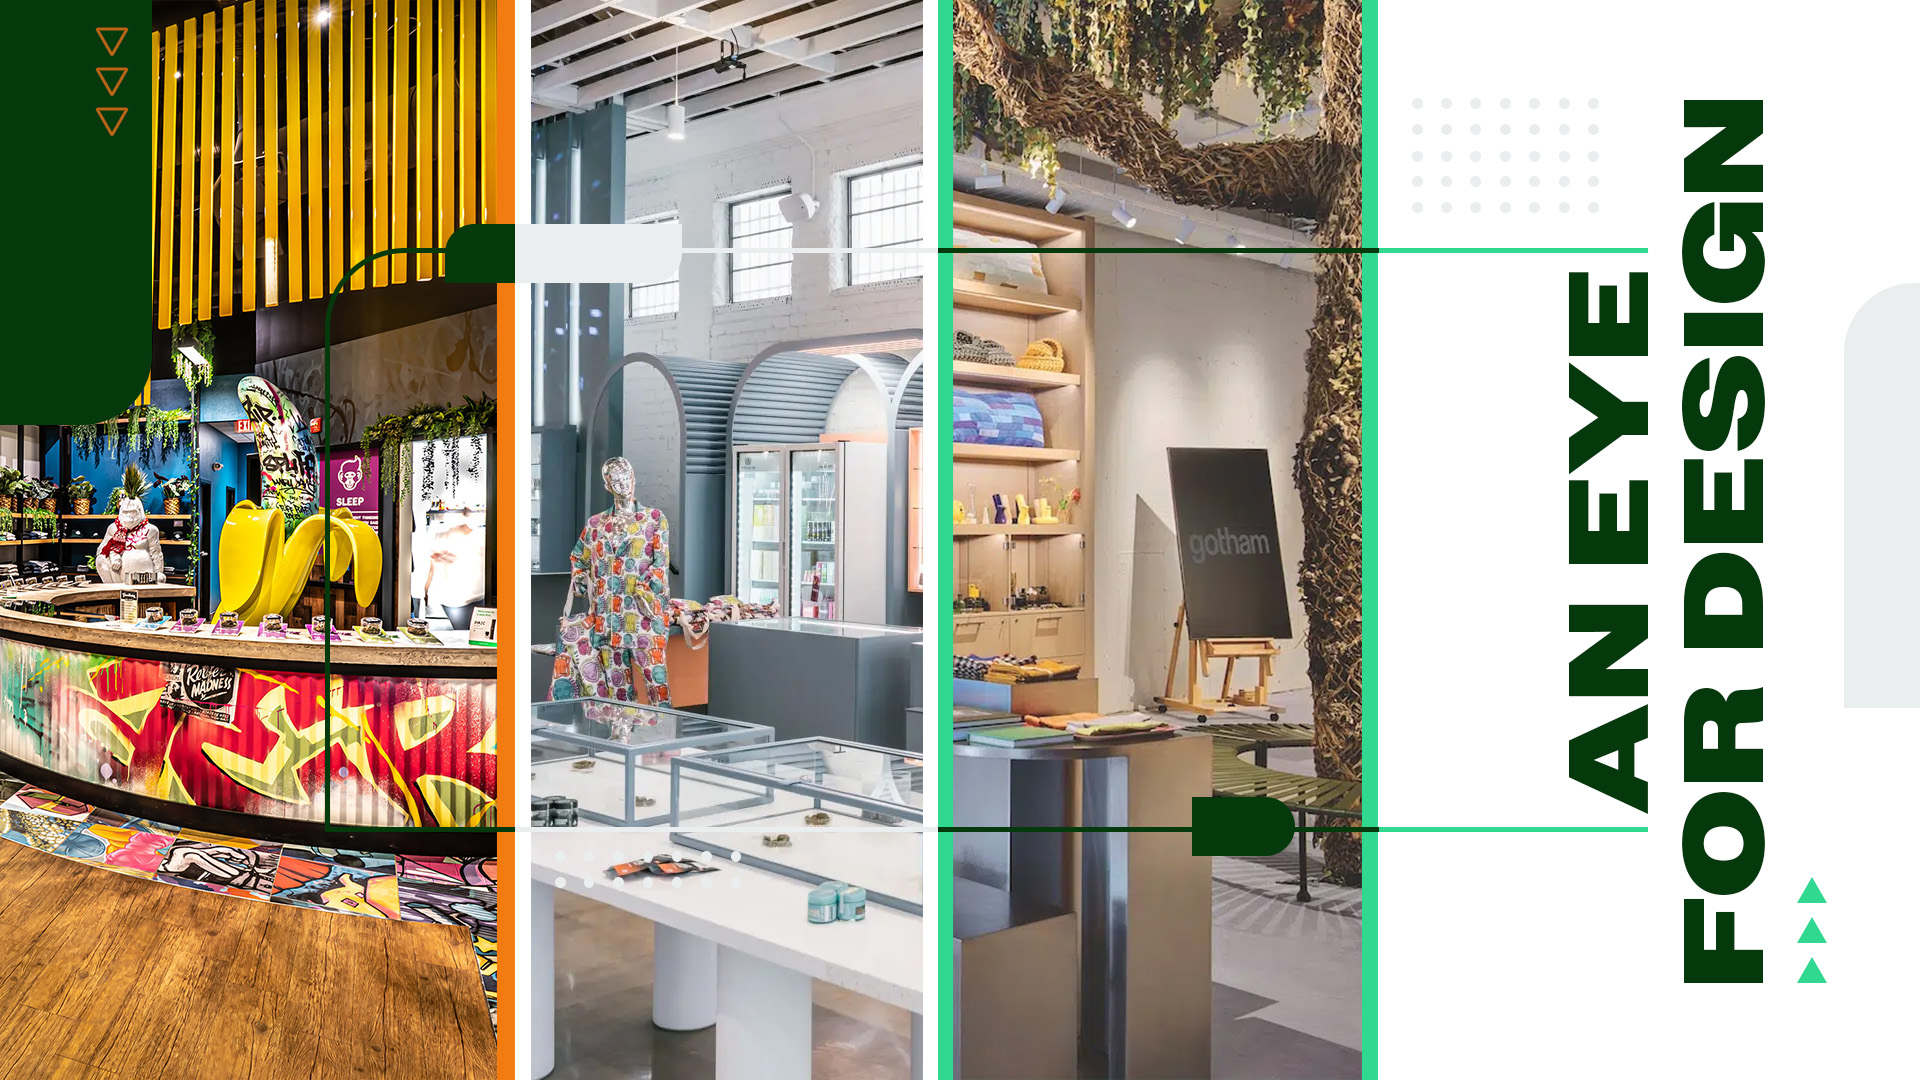 5 Cannabis Dispensaries With An Eye For Design